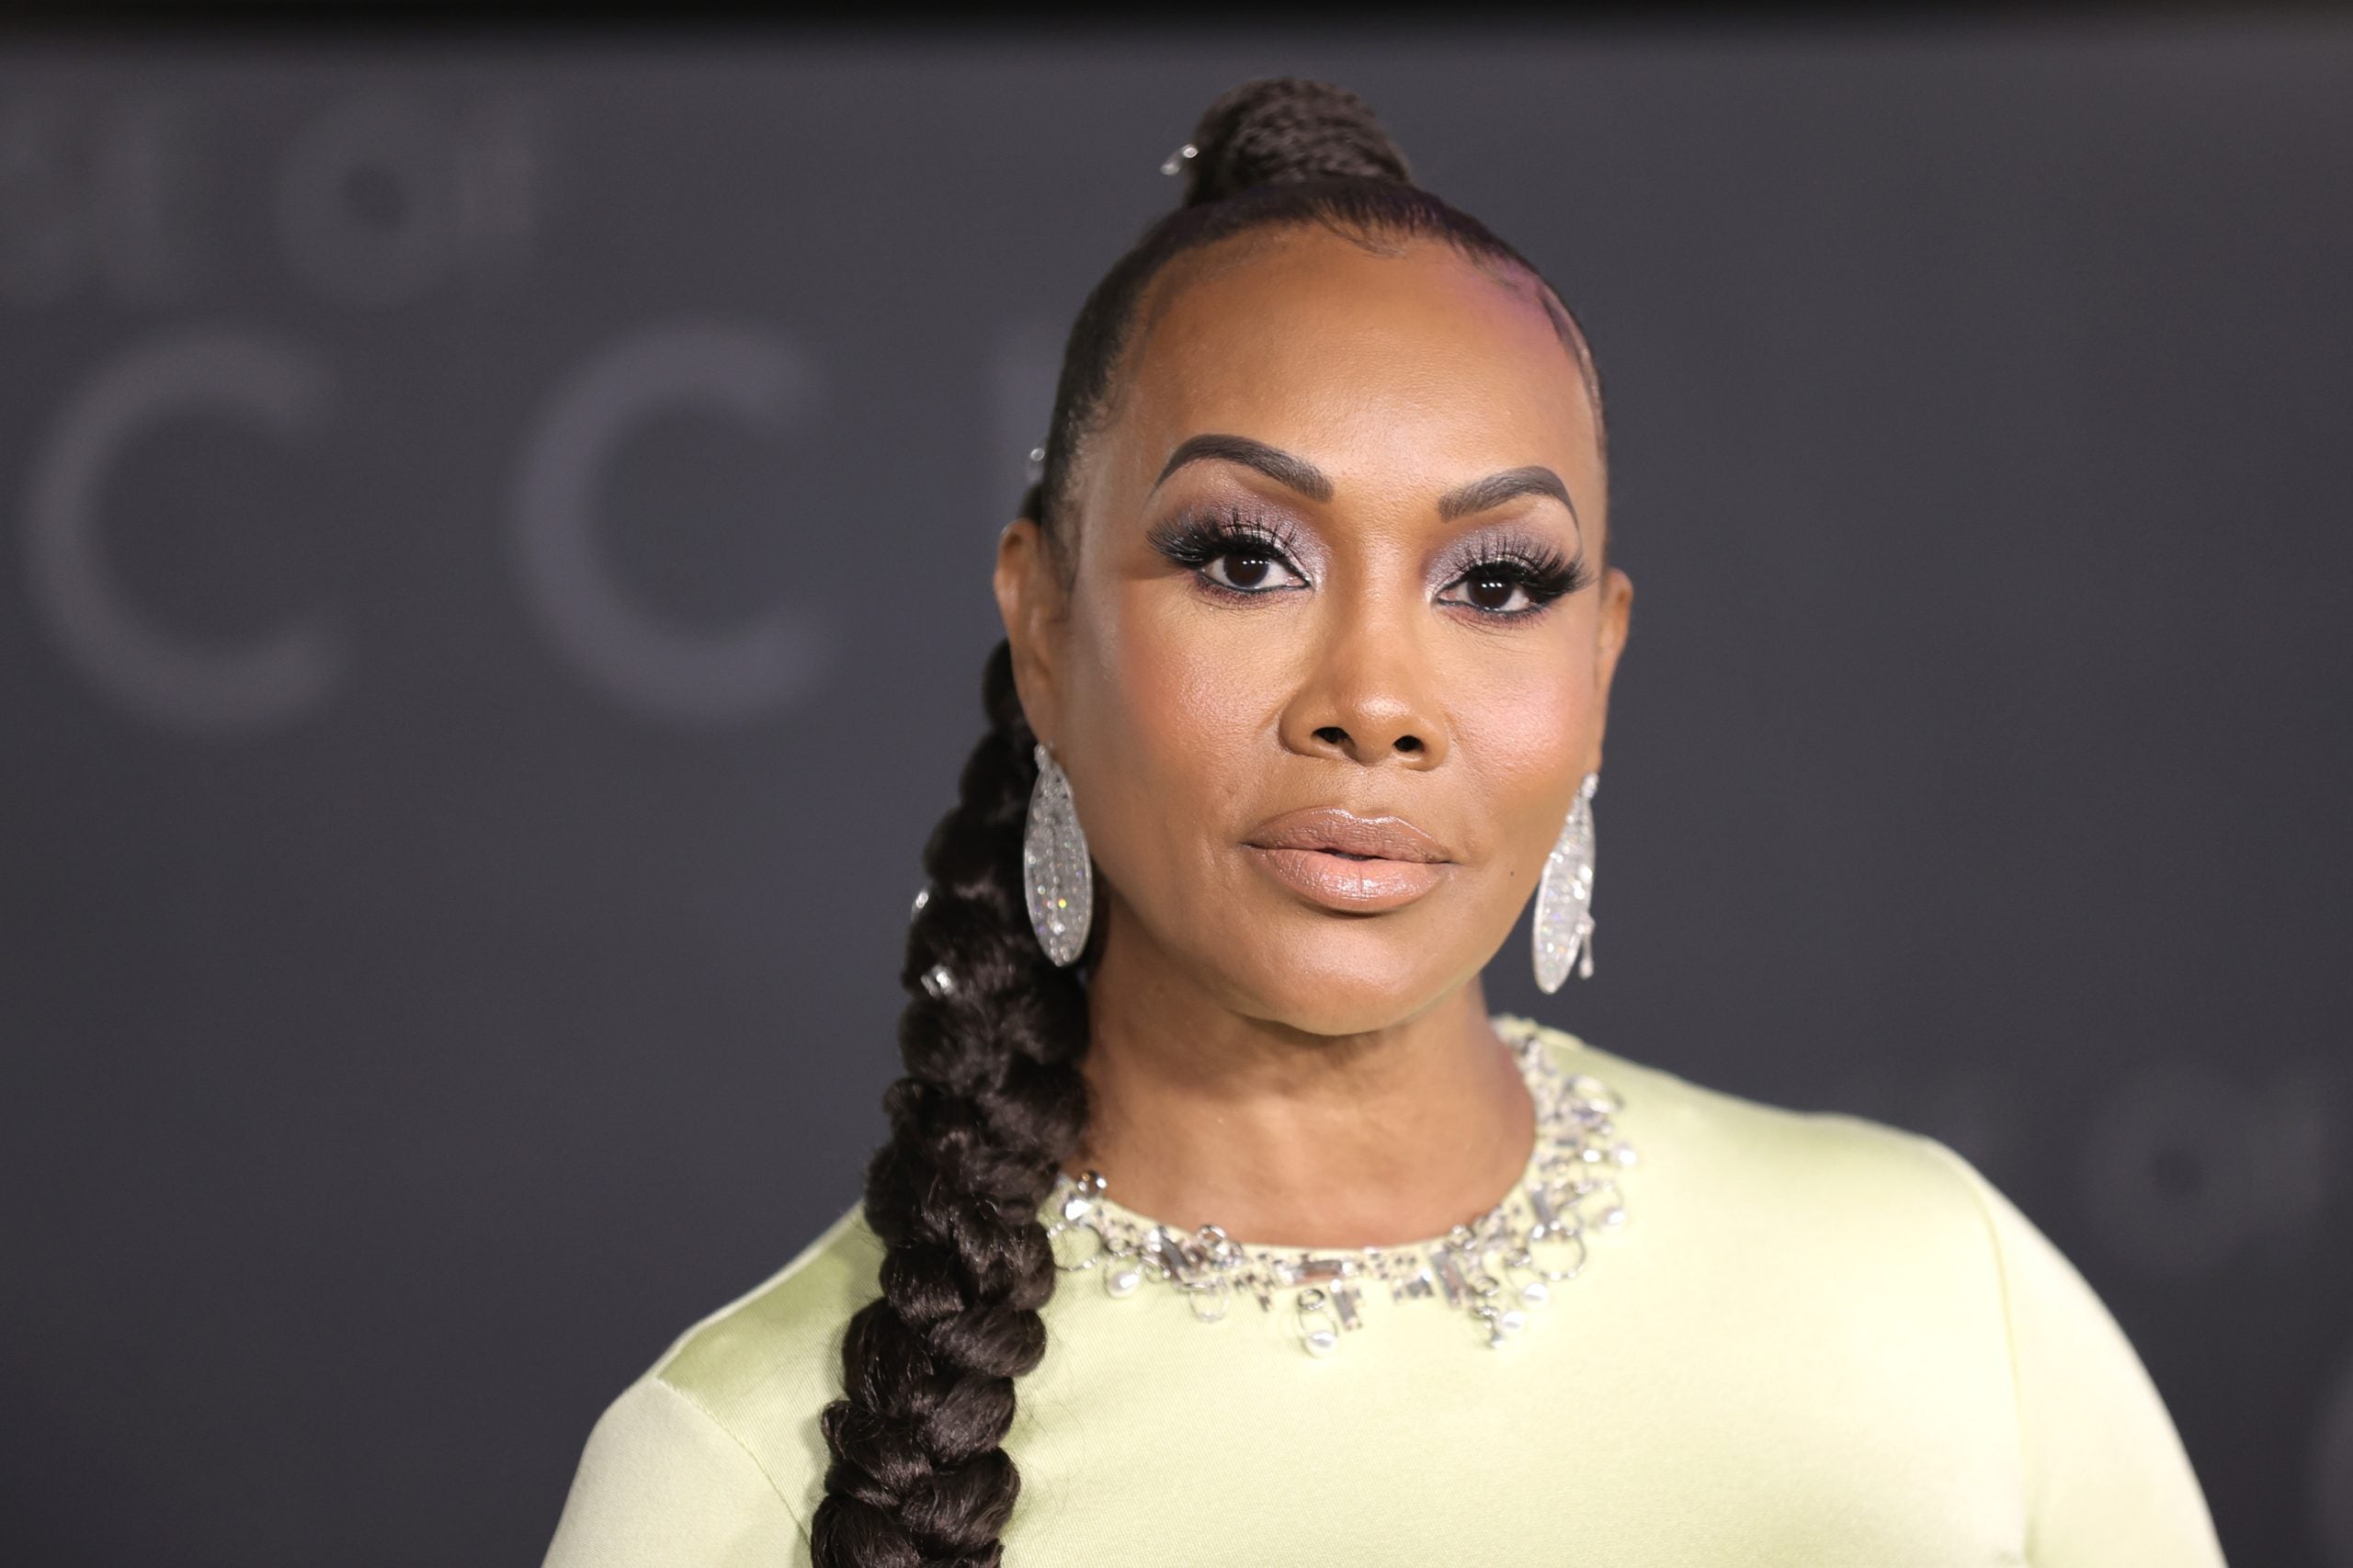 Vivica A. Fox On Motherhood: 'I Never Met The Man I Could Have Children With'